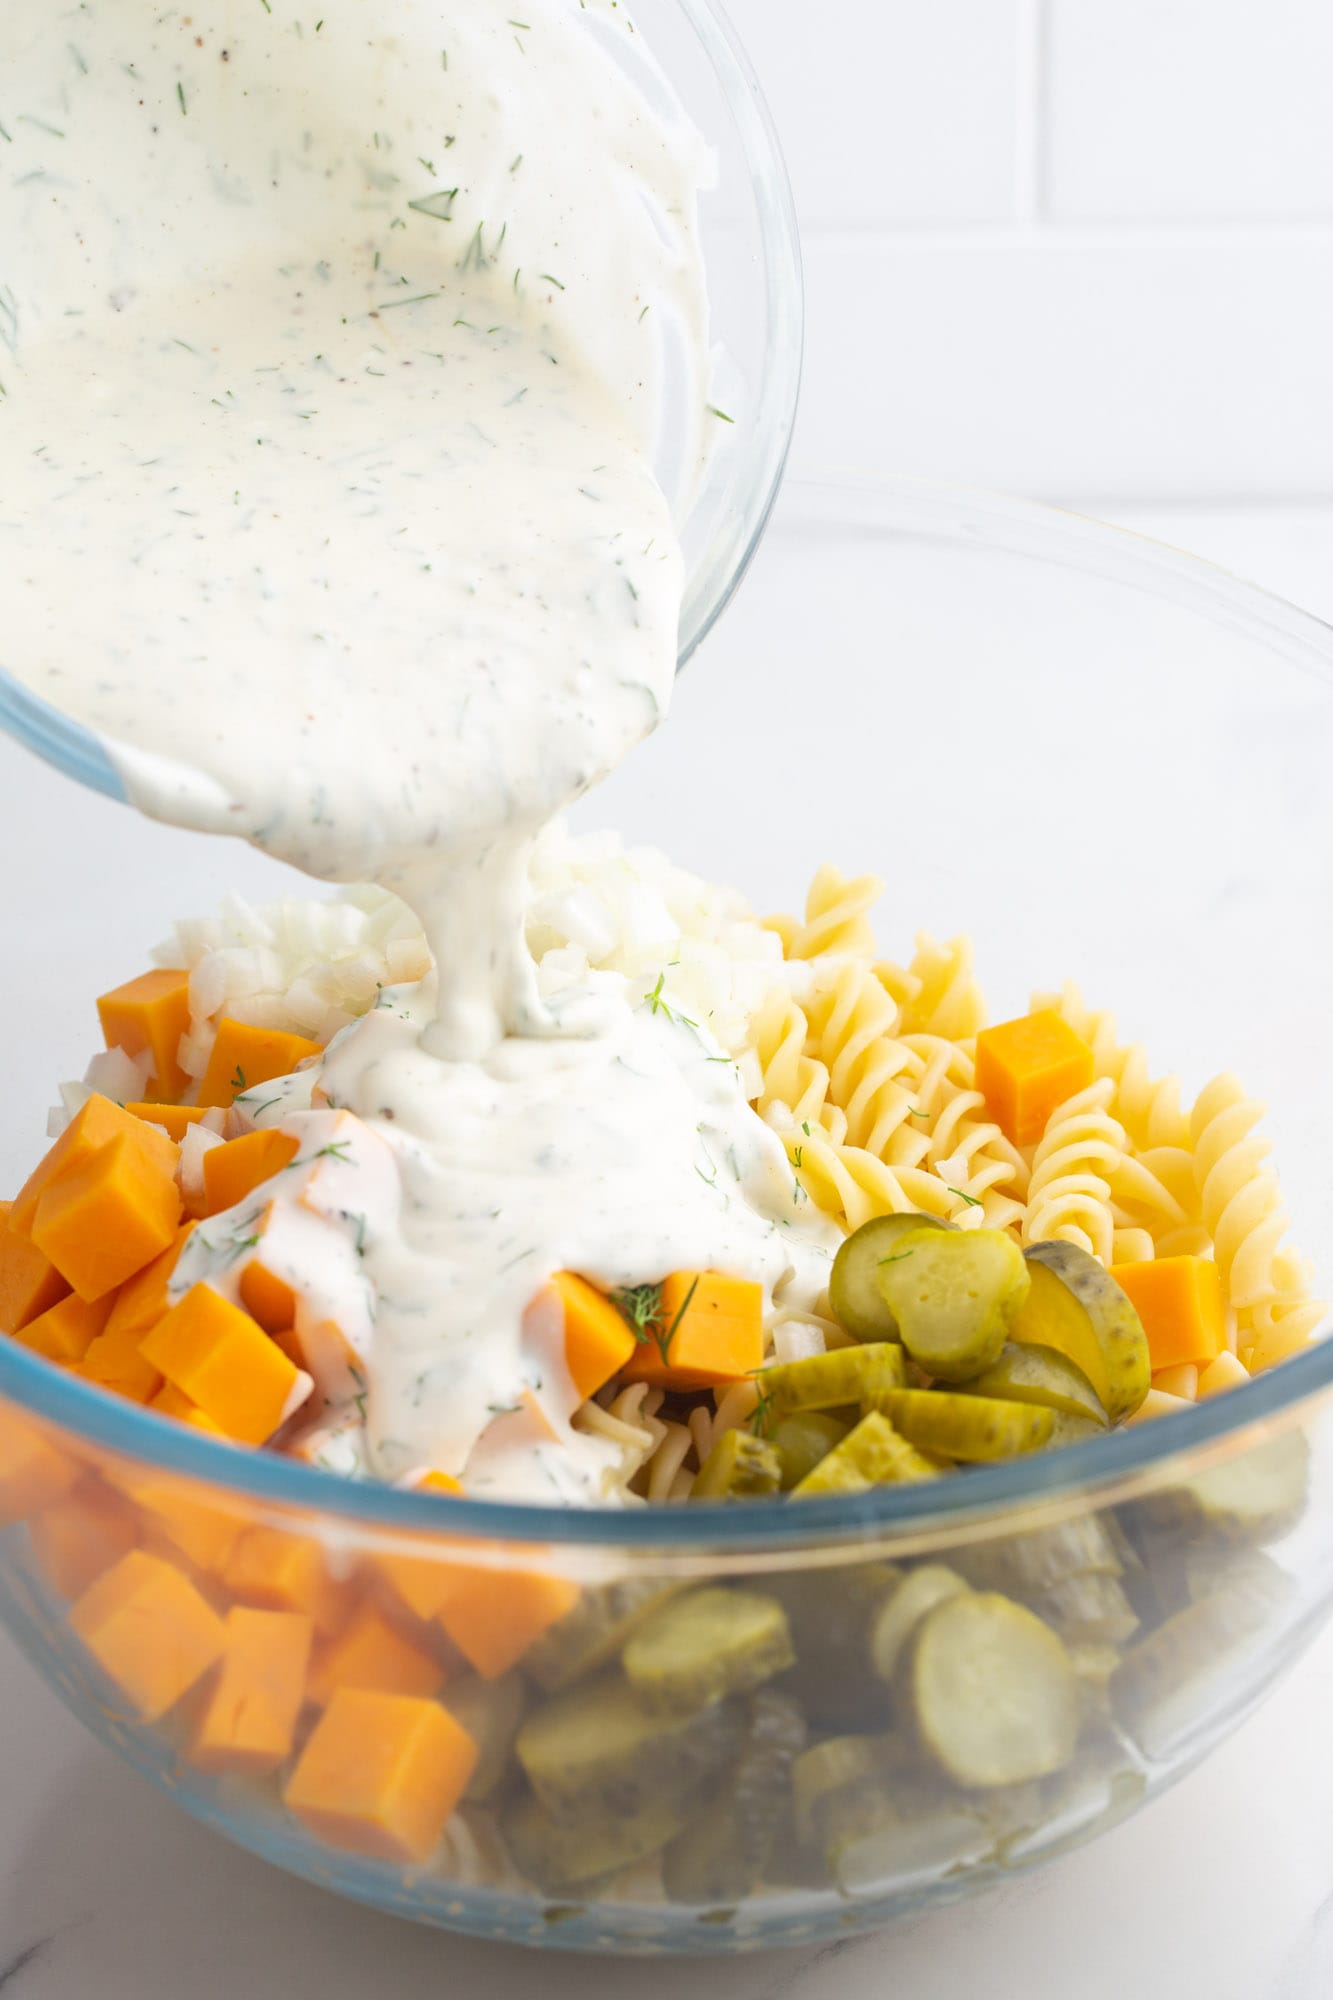 Pouring creamy dill dressing over the ingredients for pickle pasta salad